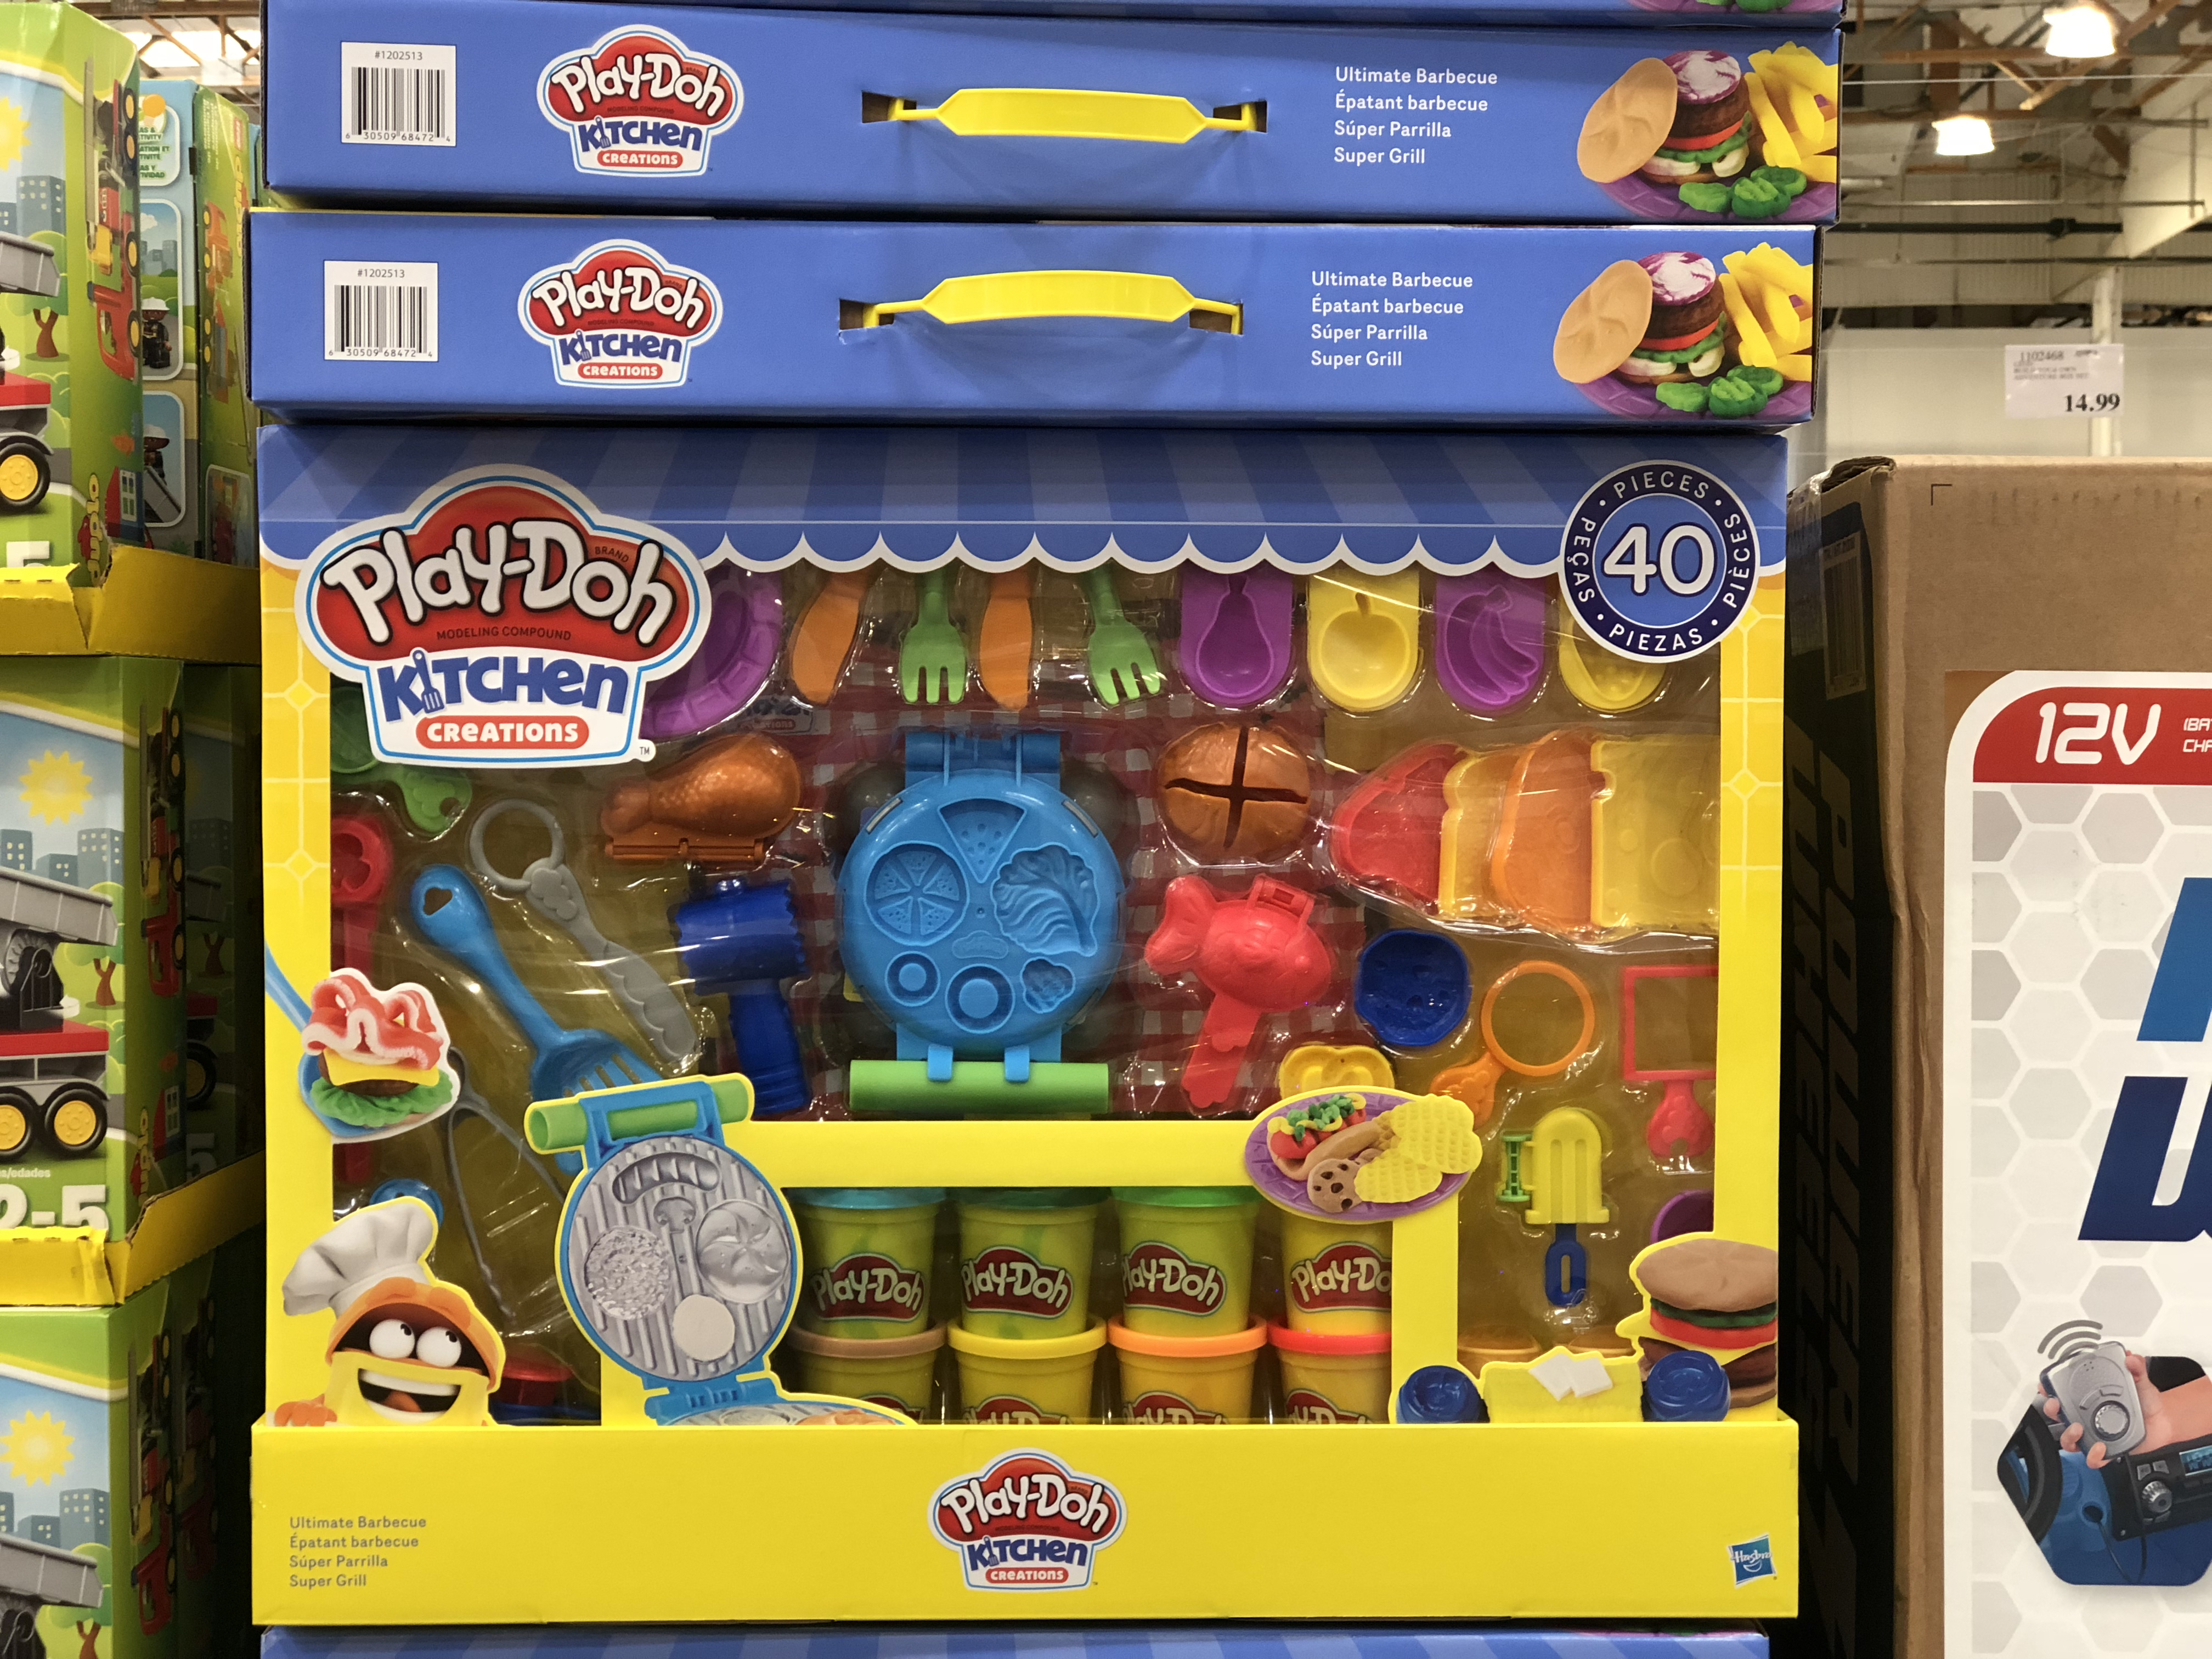 The best holiday toy deals for 2018 include Play-Doh Kitchen Creations at Costco